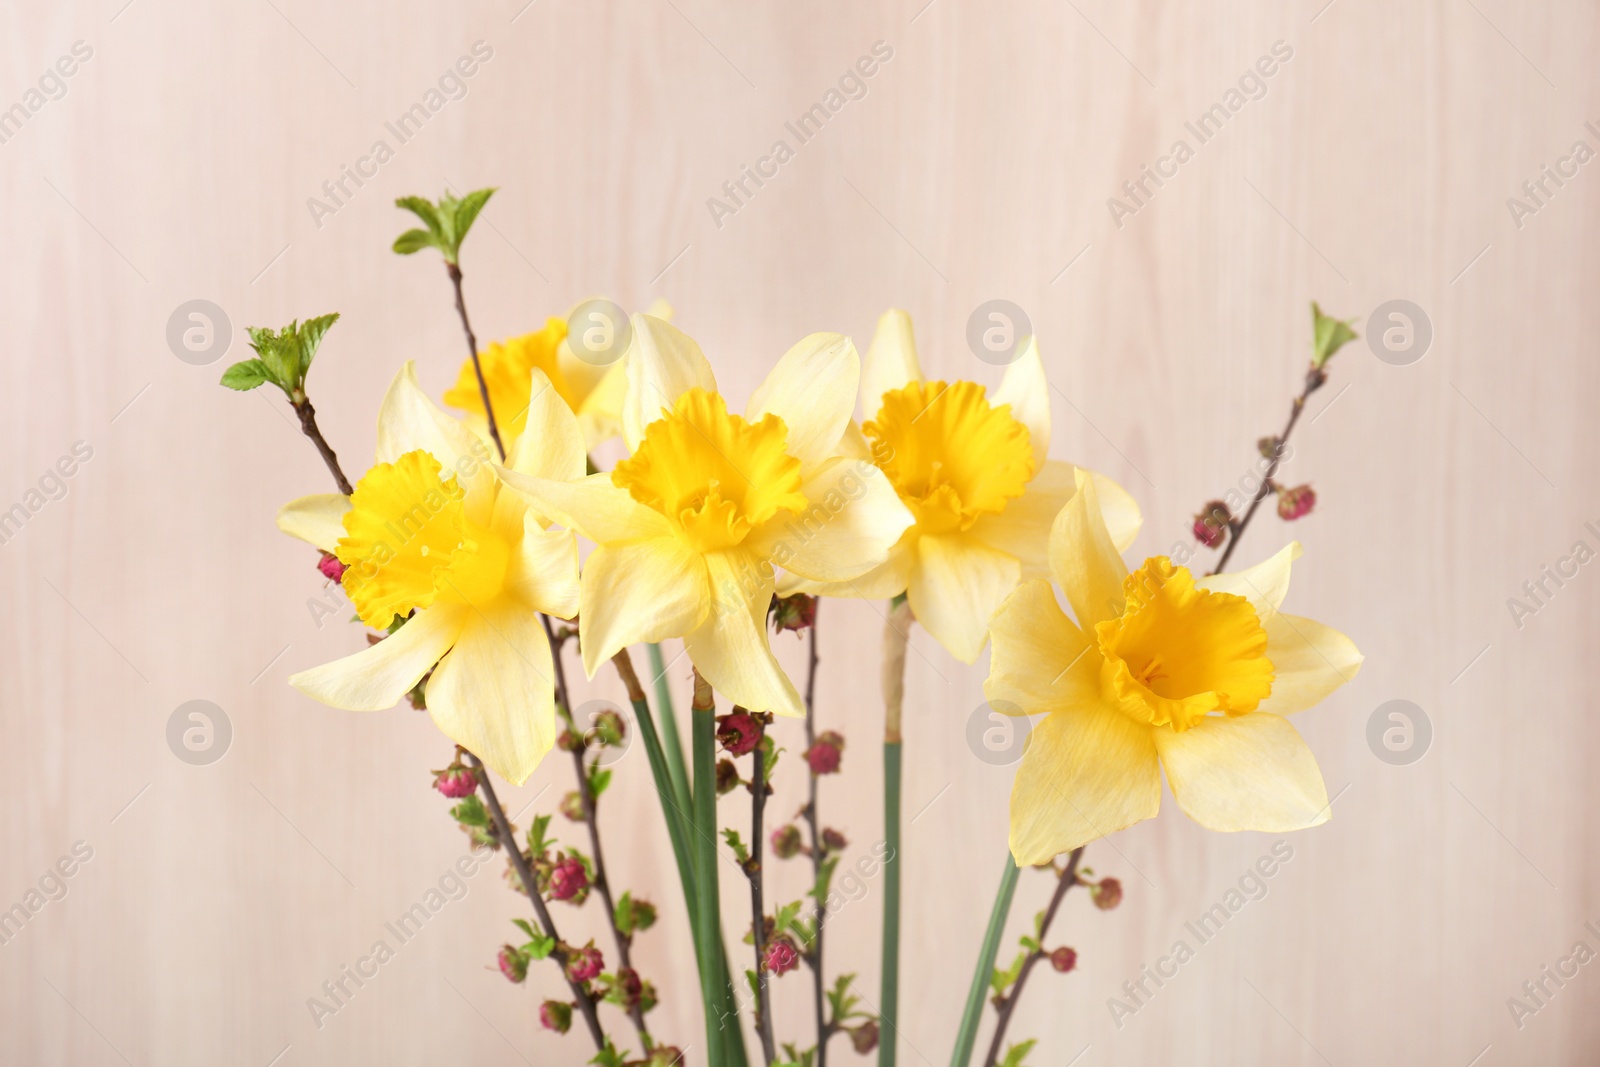 Photo of Bouquet of yellow daffodils and beautiful flowers near wall